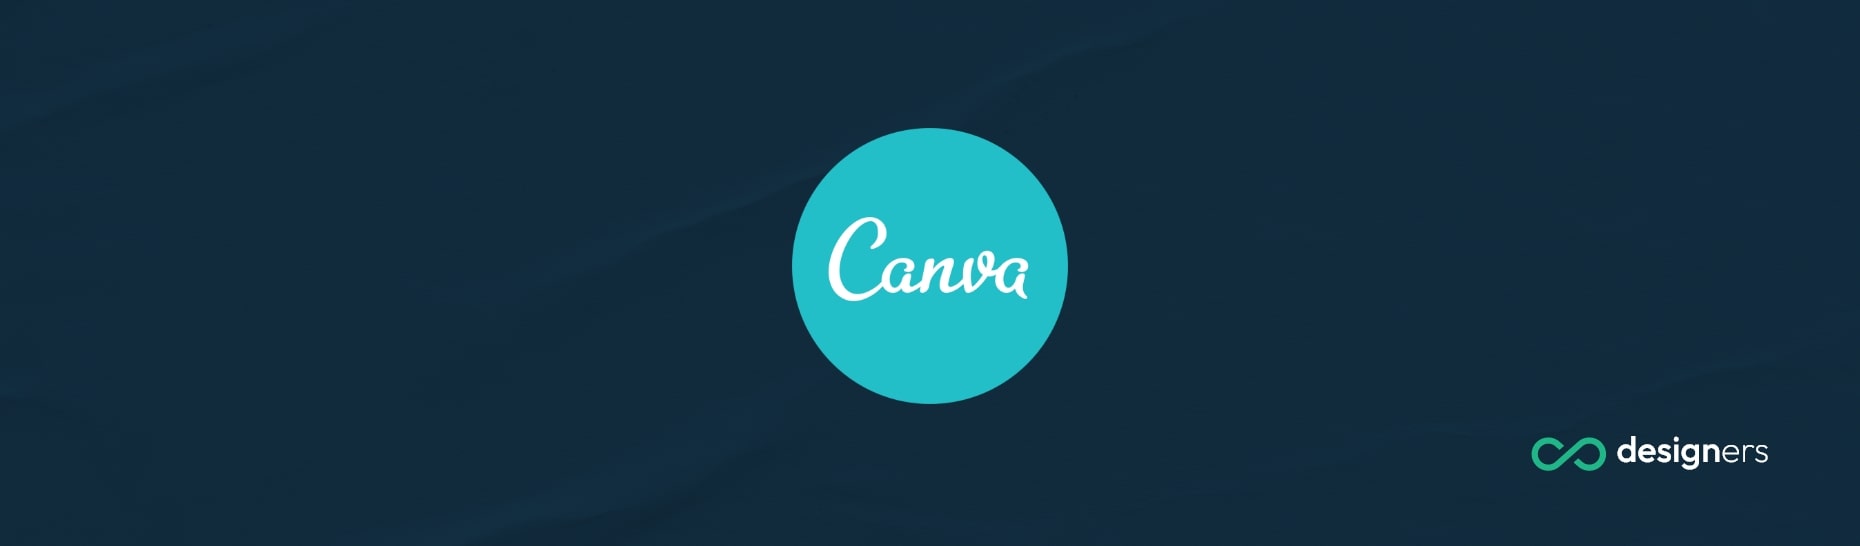 How Do You Make a Bullet Journal in Canva?